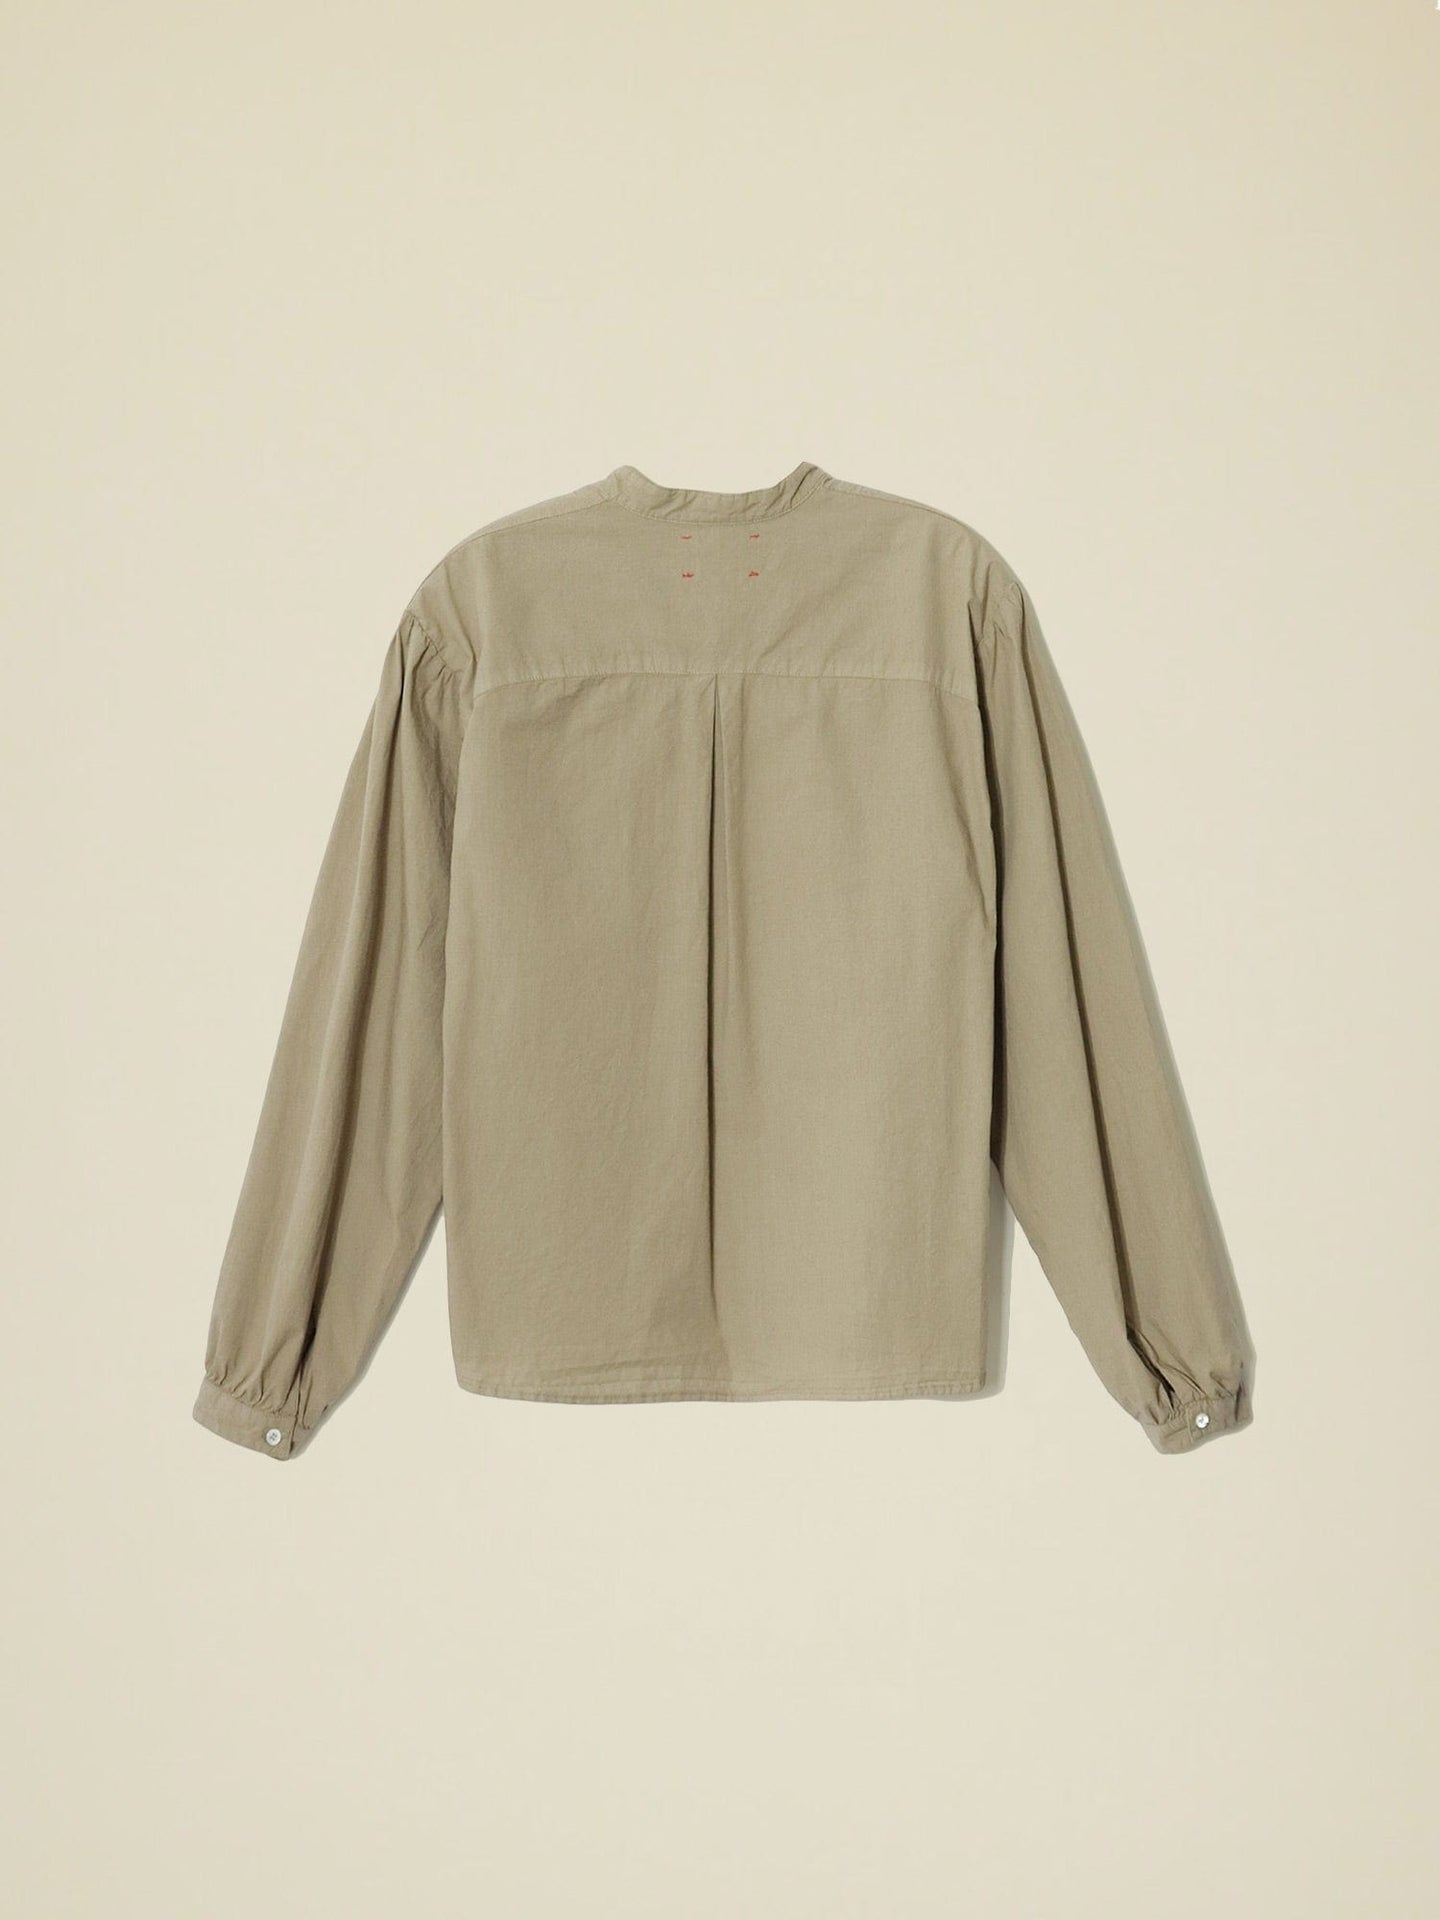 Xirena Shirt Taupe Connolly Shirt